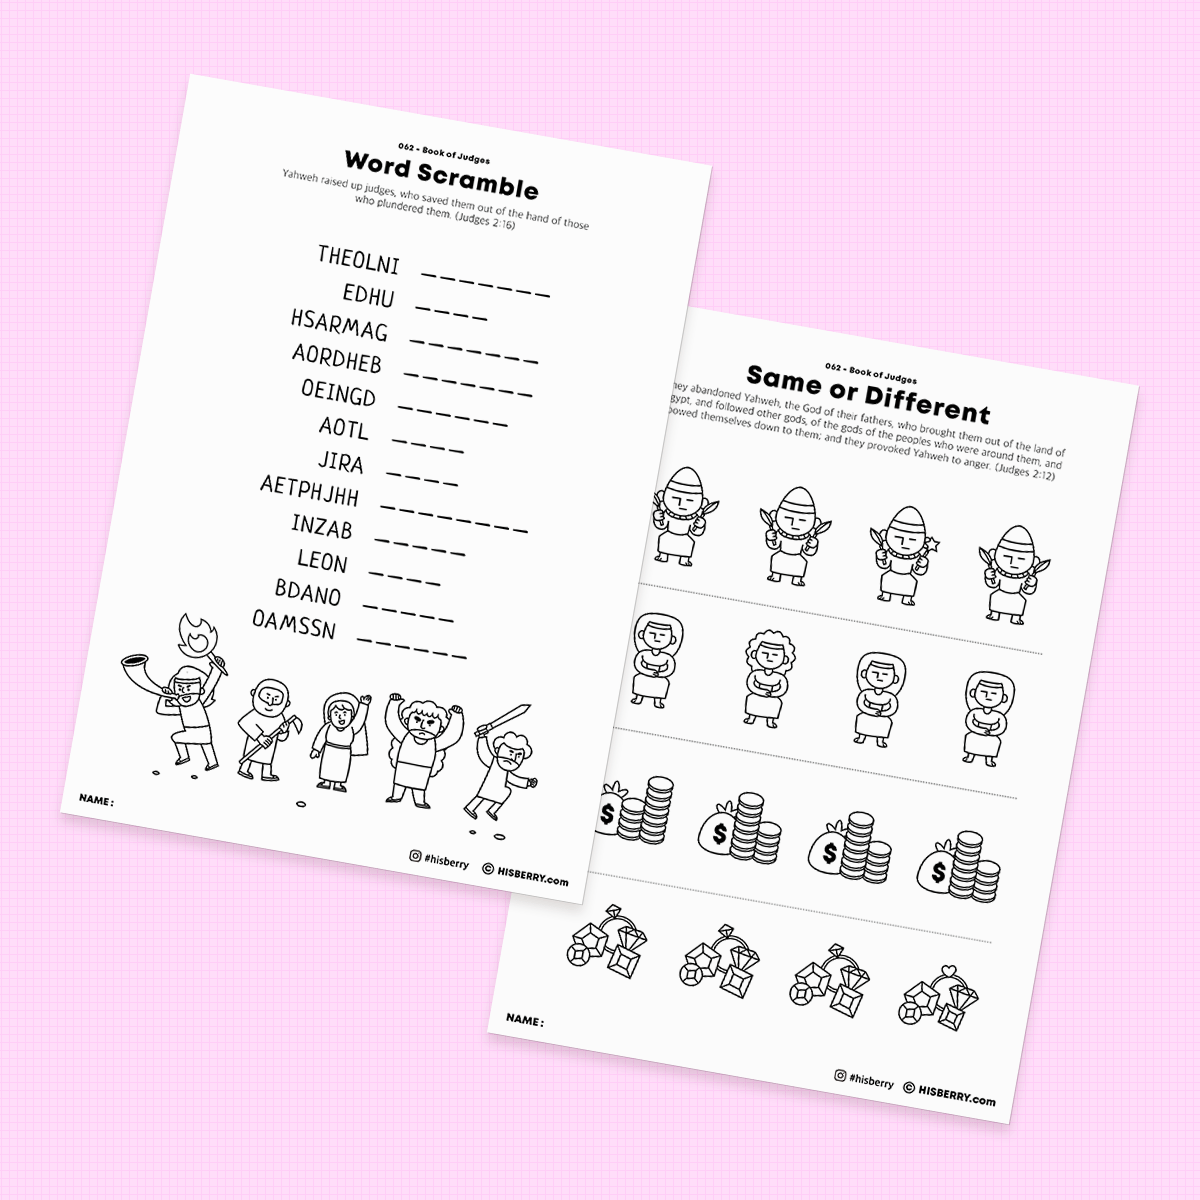 The-Book-of-judges-Bible-Activity-Printables-worksheet